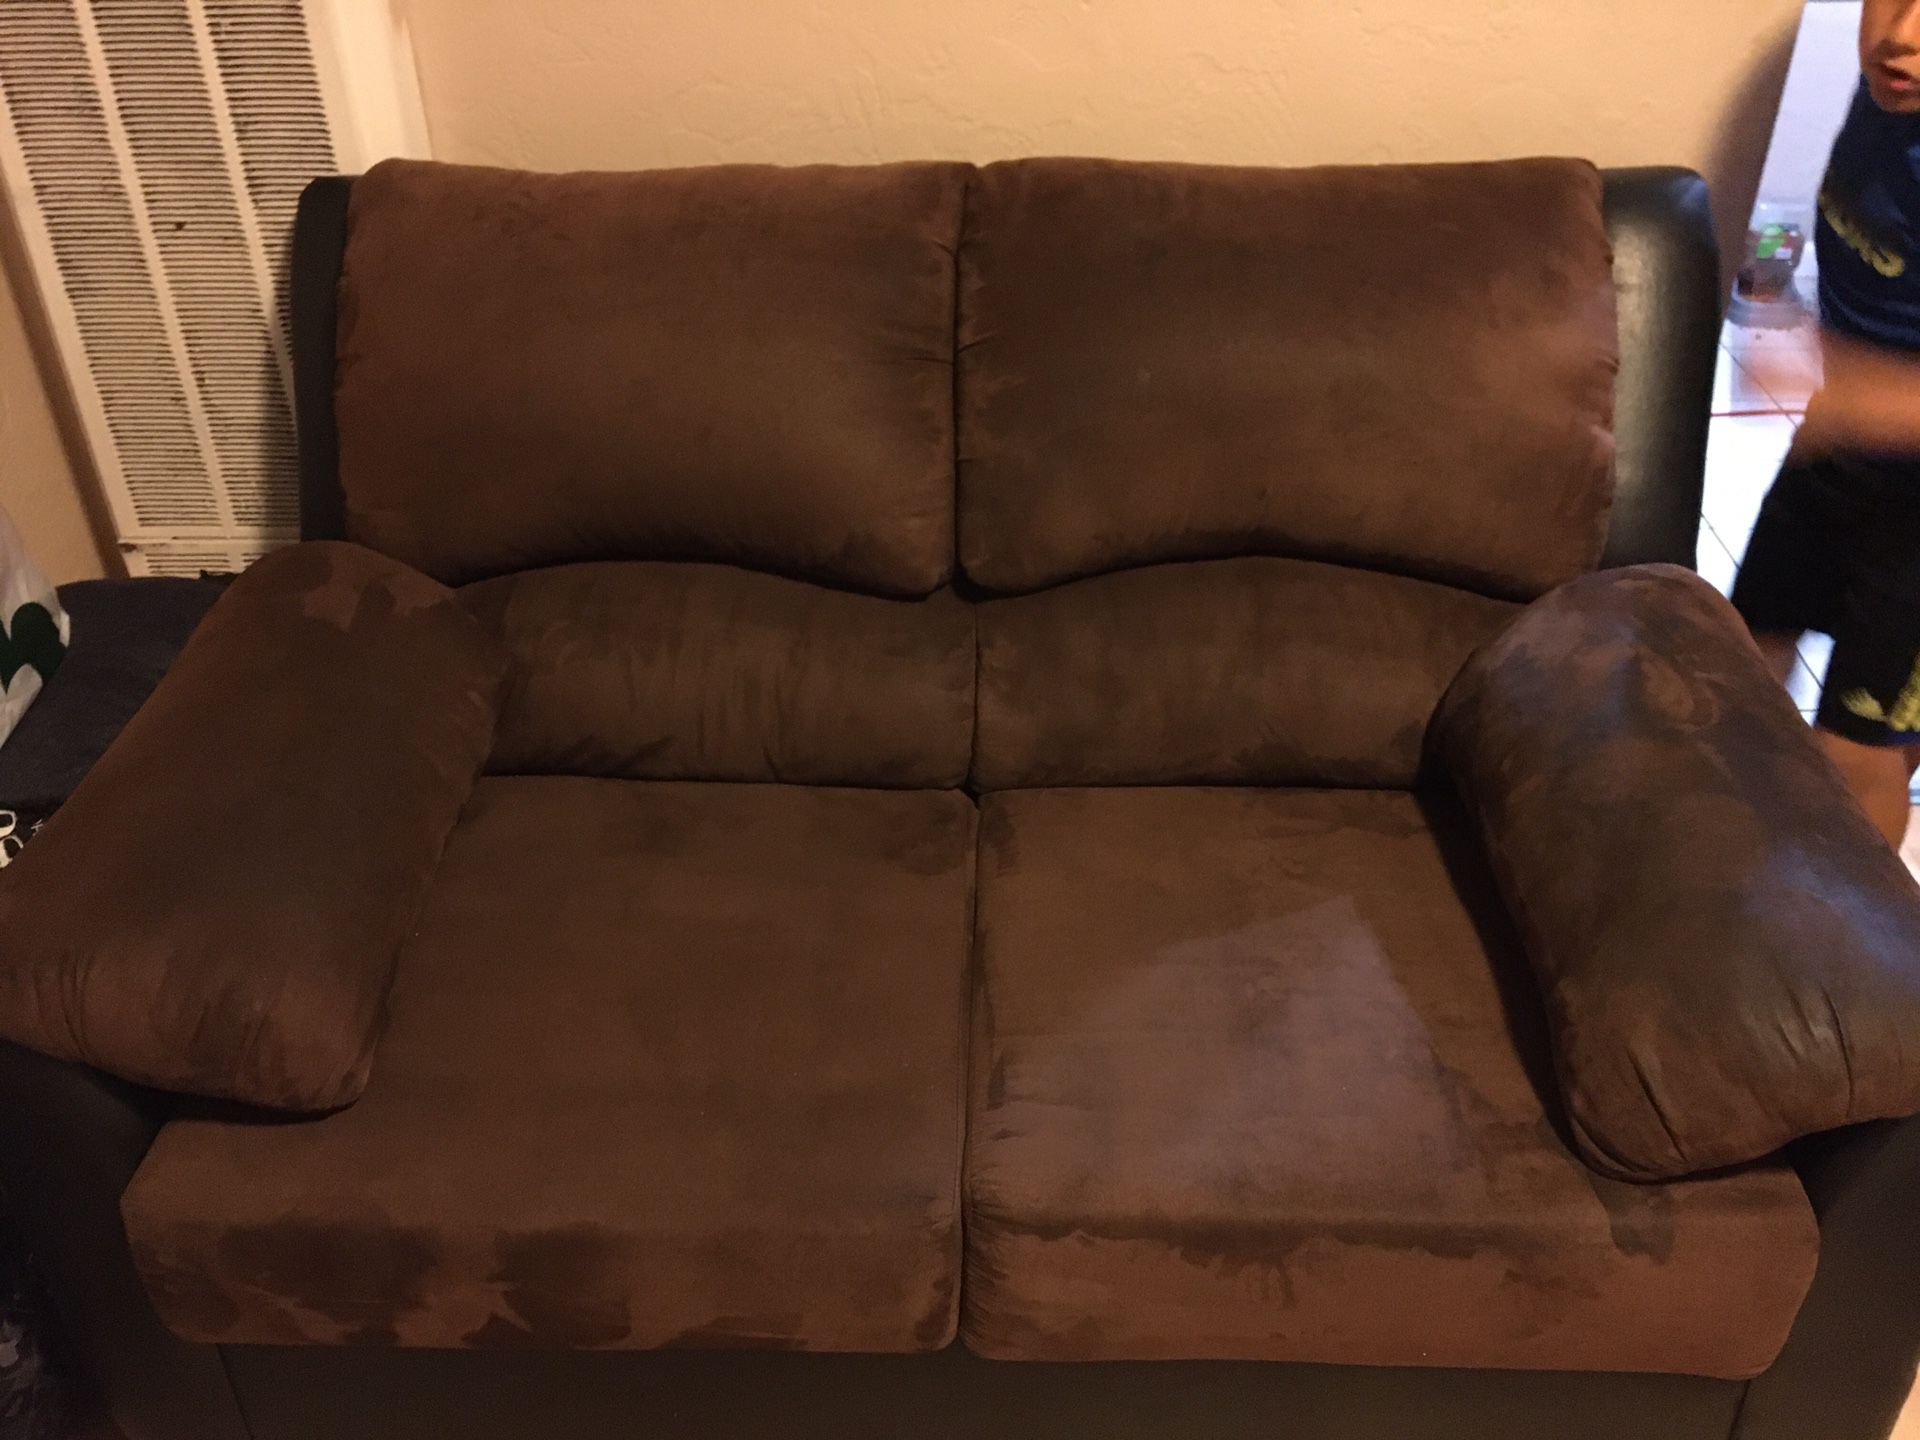 Free couch